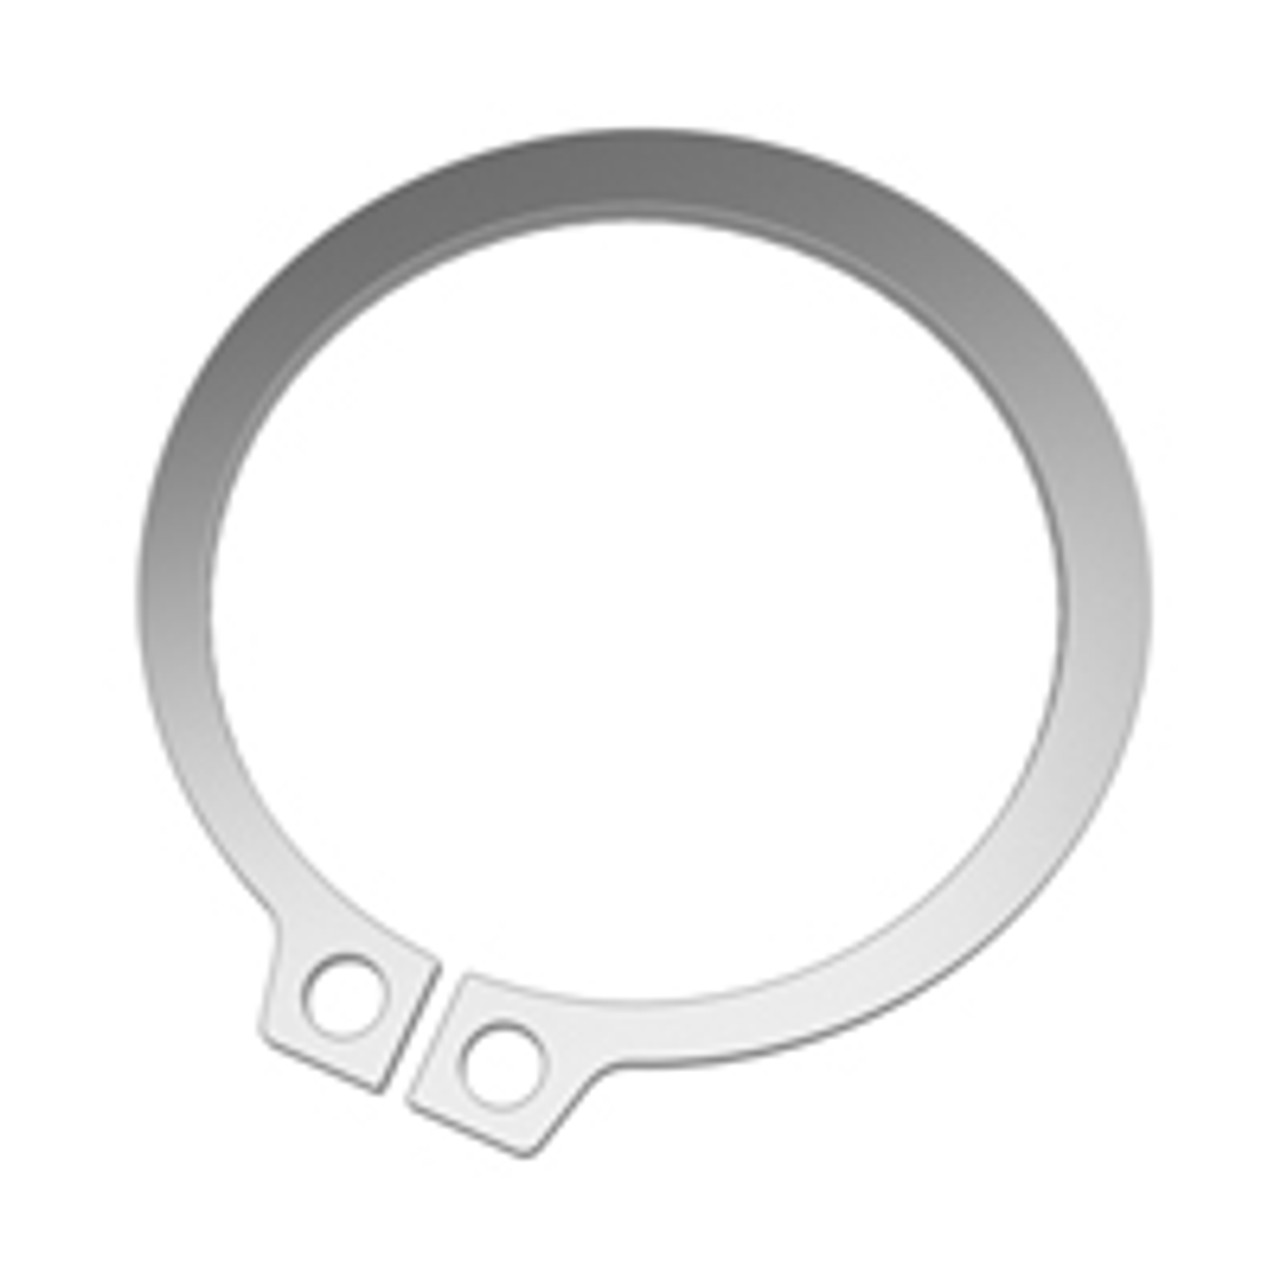 Rotor Clip - Application Spotlight: Using a bowed retaining ring (circlip)  can offer a simple, cost effective solution to applications prone to axial  movement, such as gears. Get in touch to see